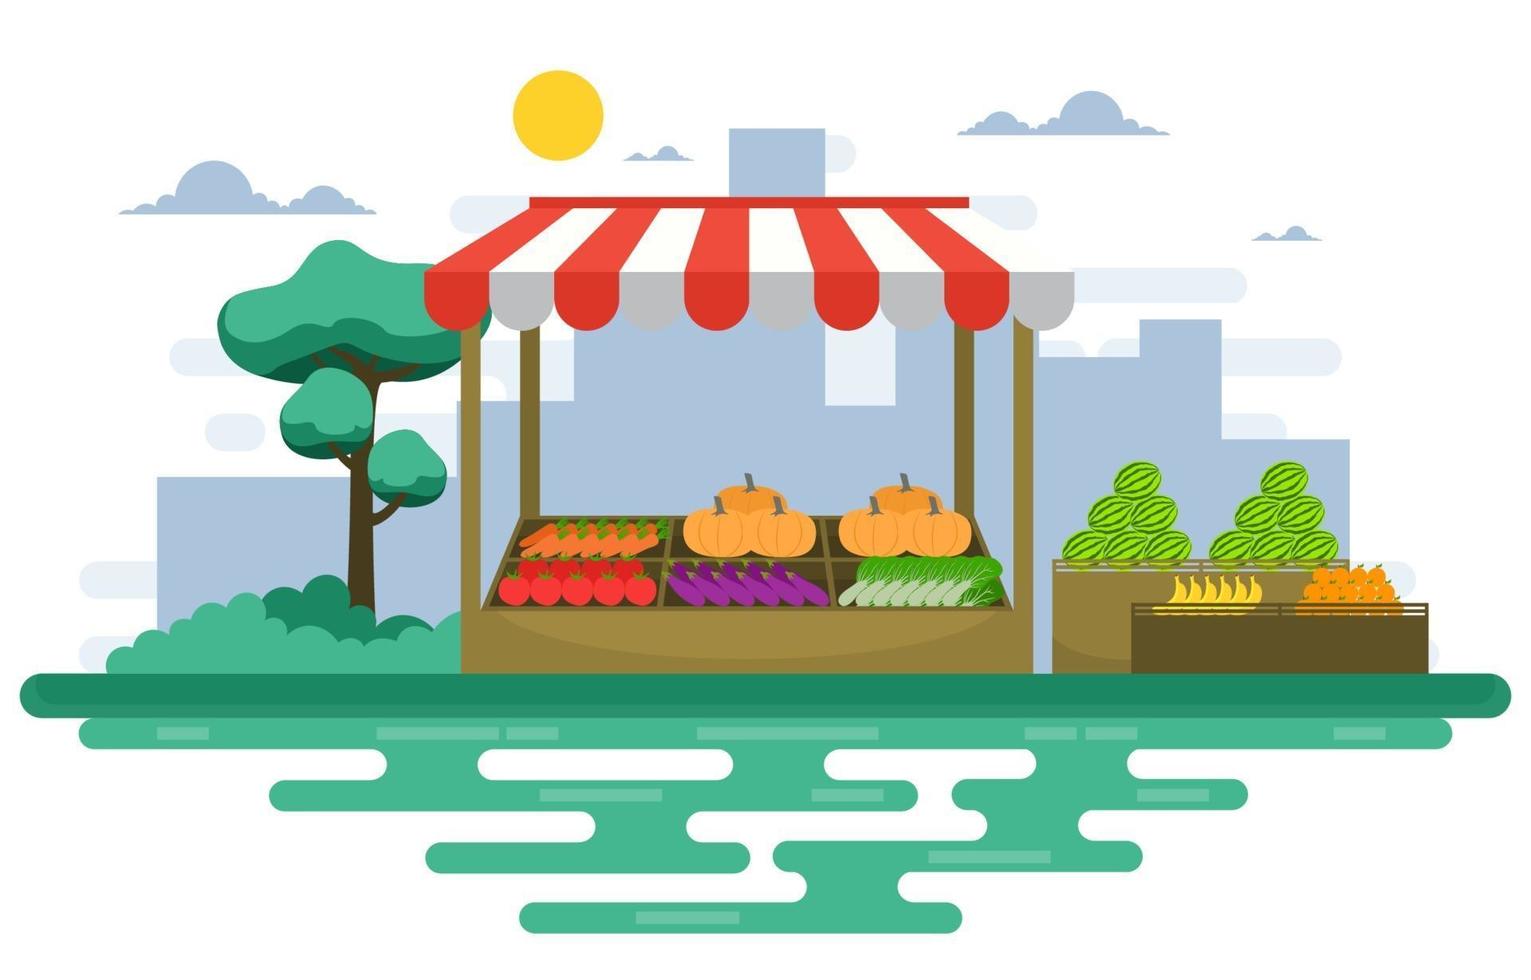 Healthy Fruit Vegetable Store Stall Stand Grocery in City Illustration vector